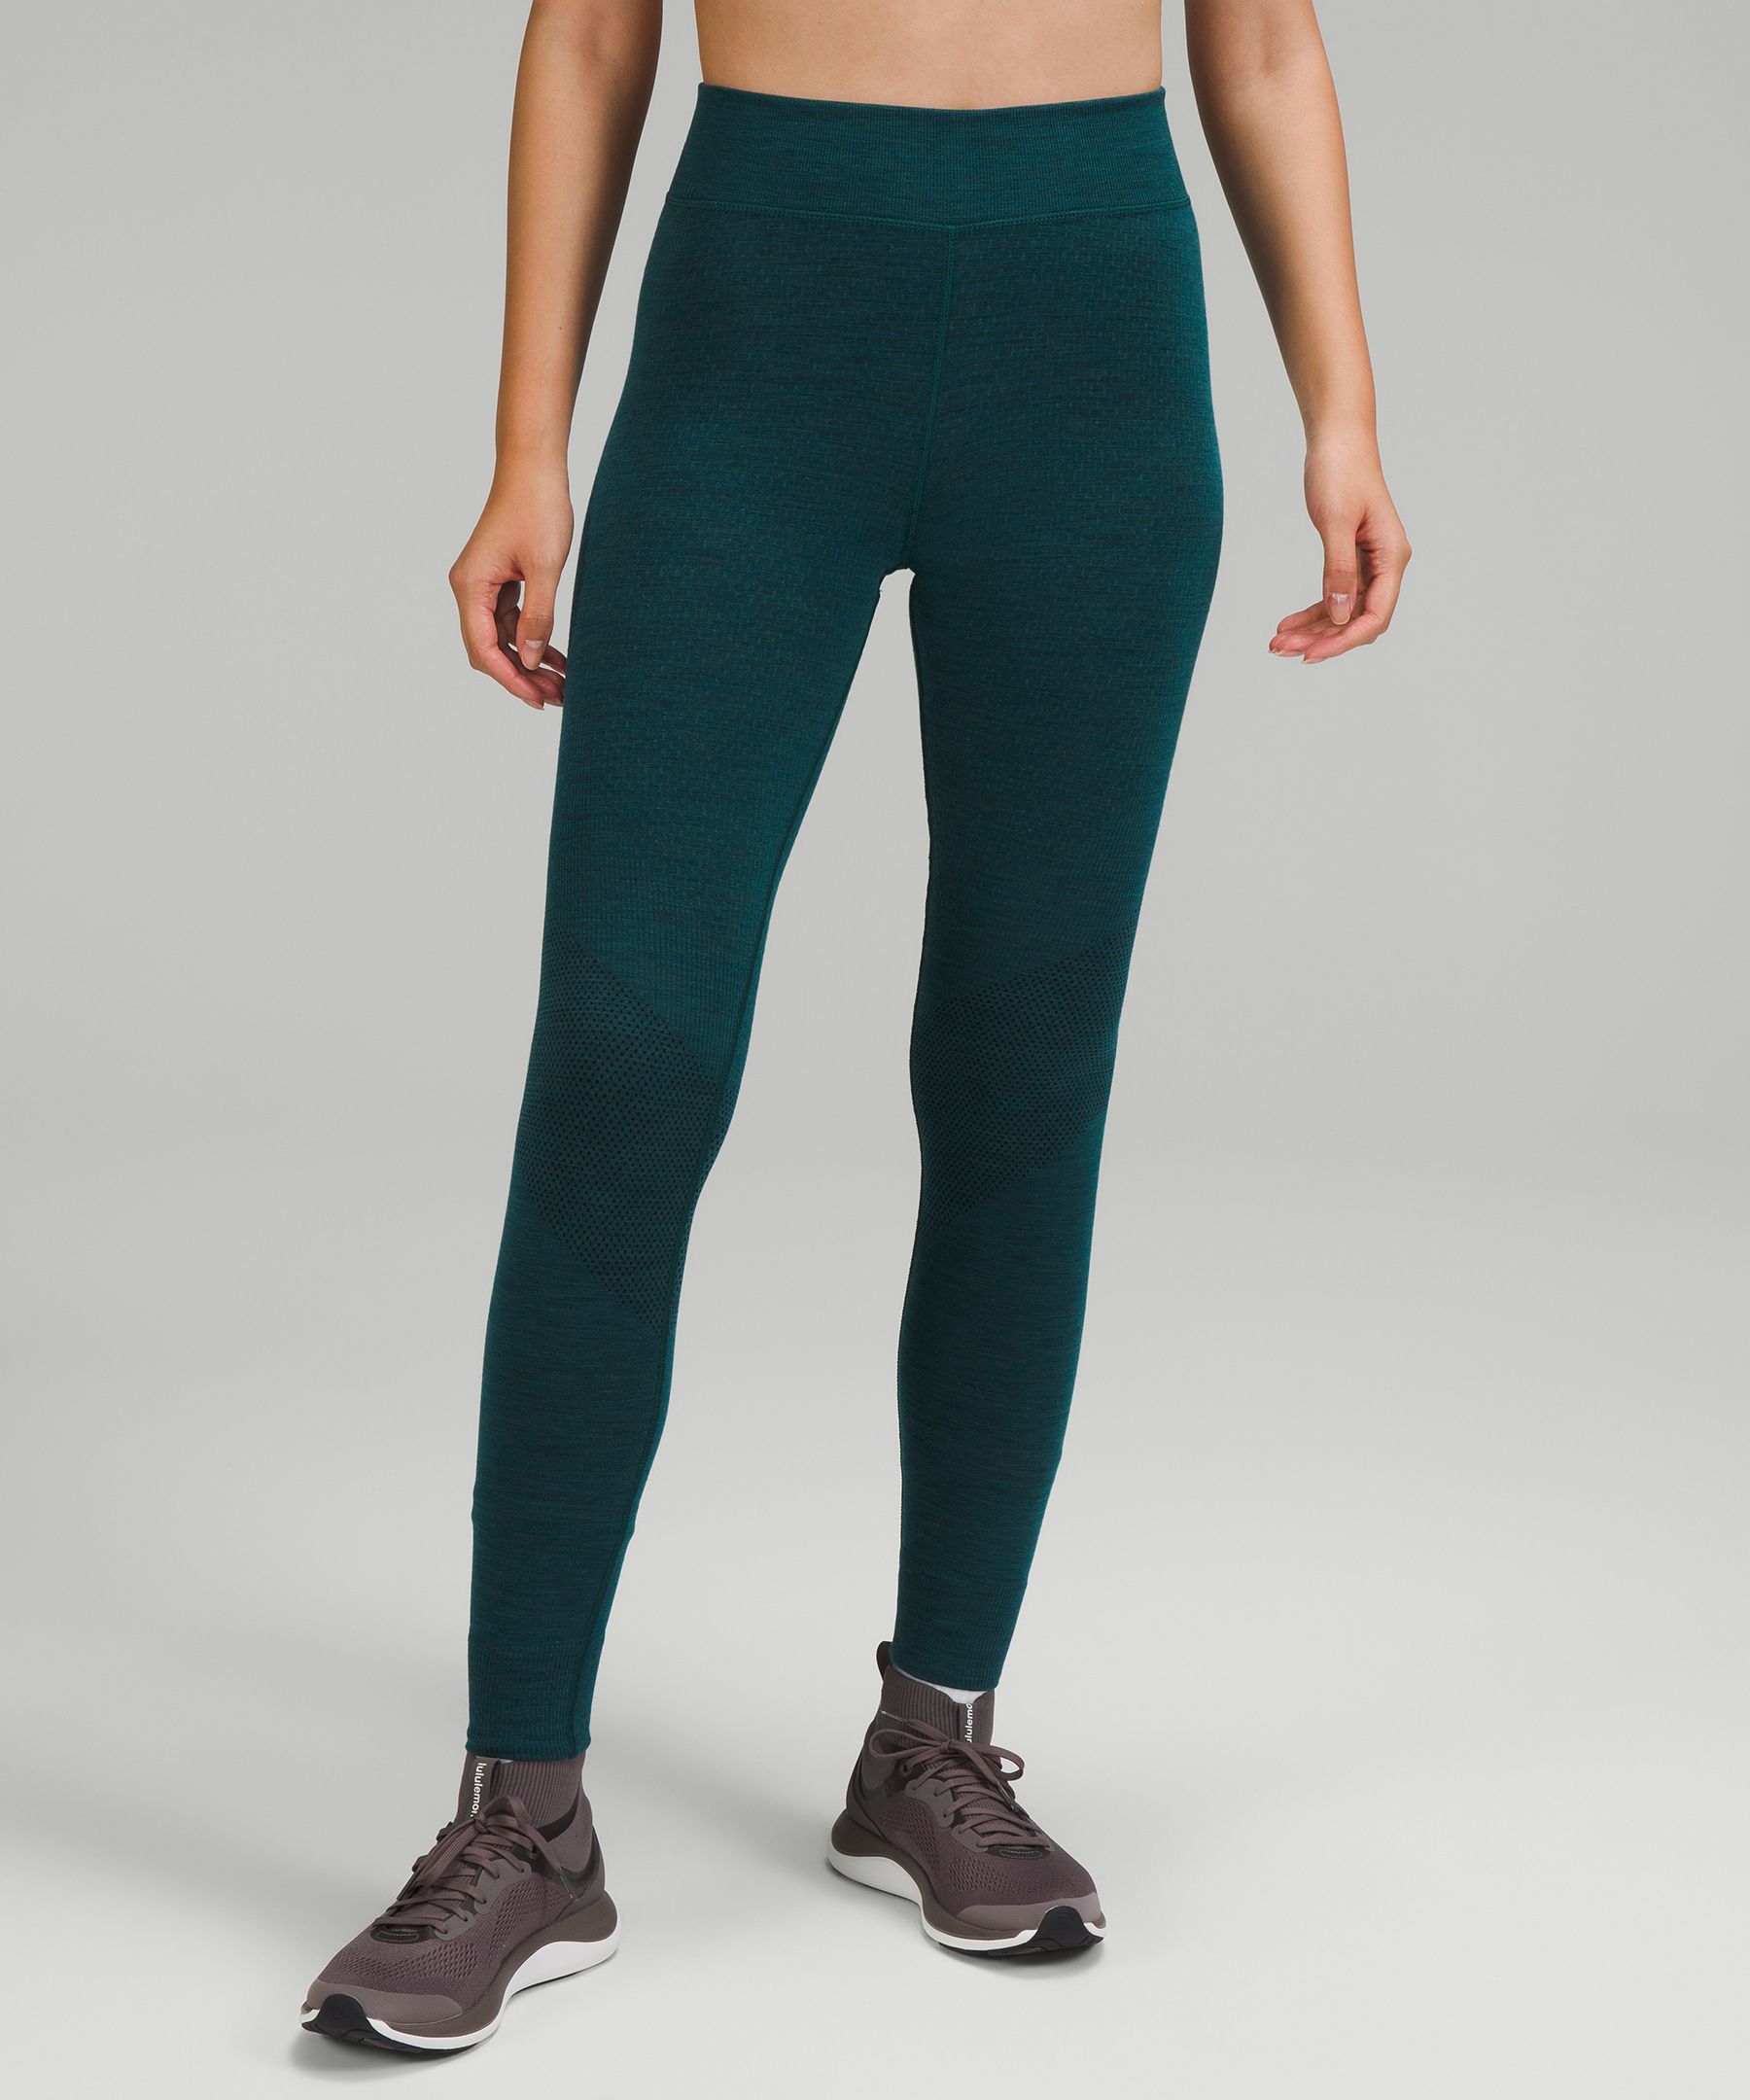 Lululemon athletica Cold Weather High-Rise Running Tight 28, Women's  Leggings/Tights